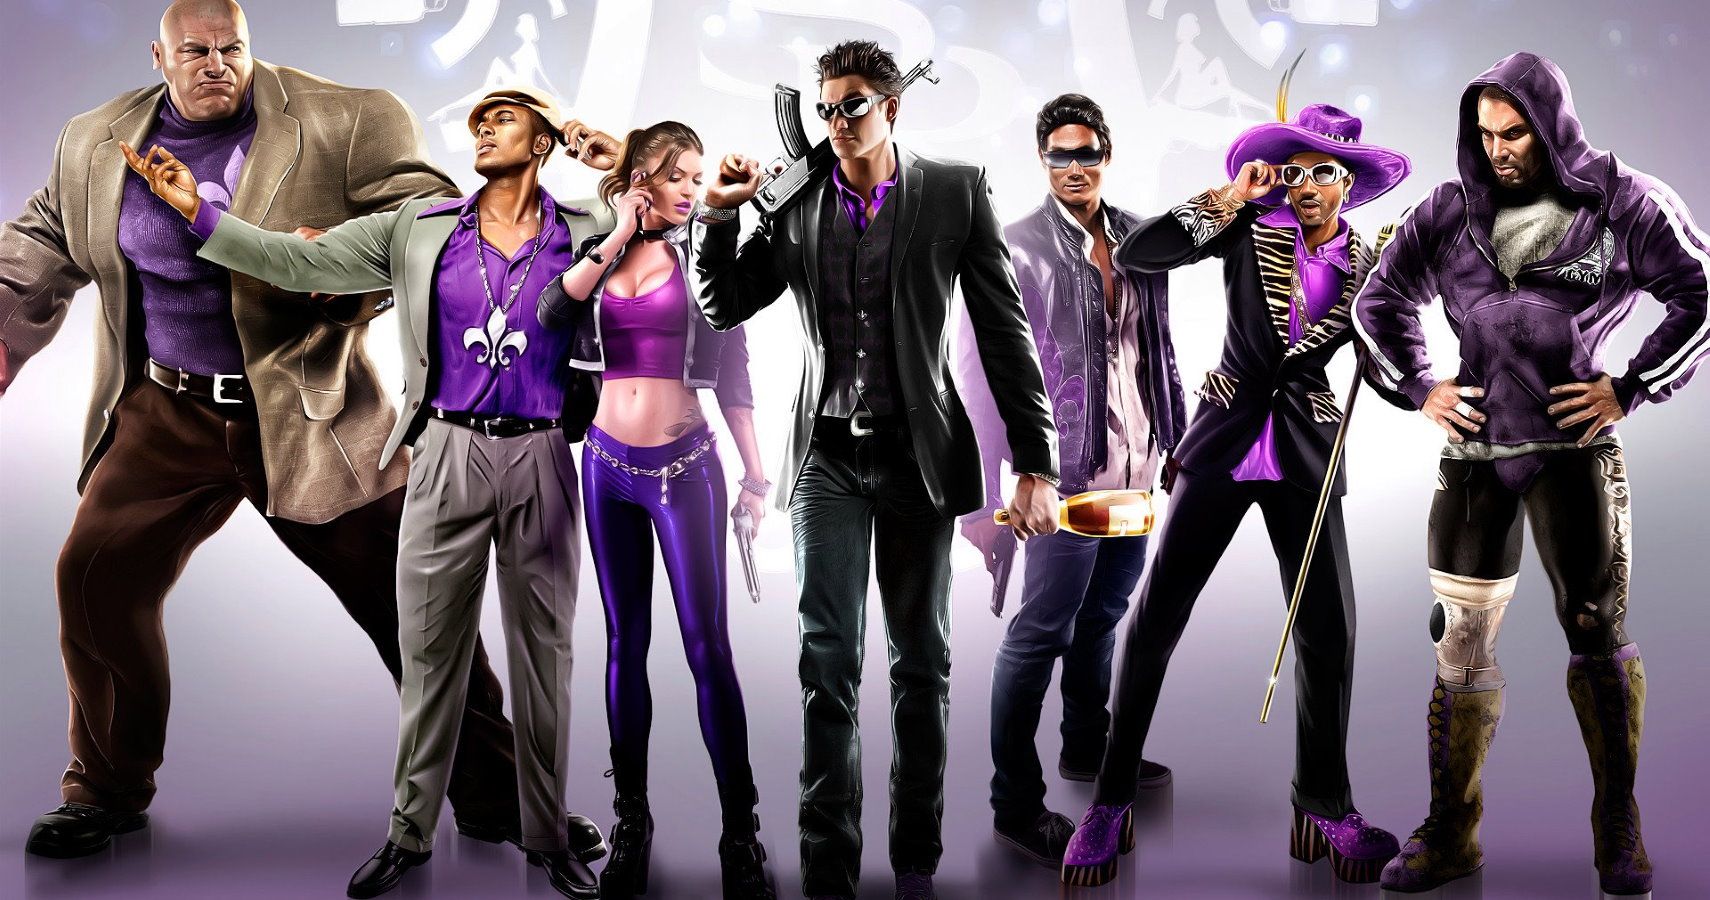 Saints Row: The Third Remastered Heads to Xbox Series X